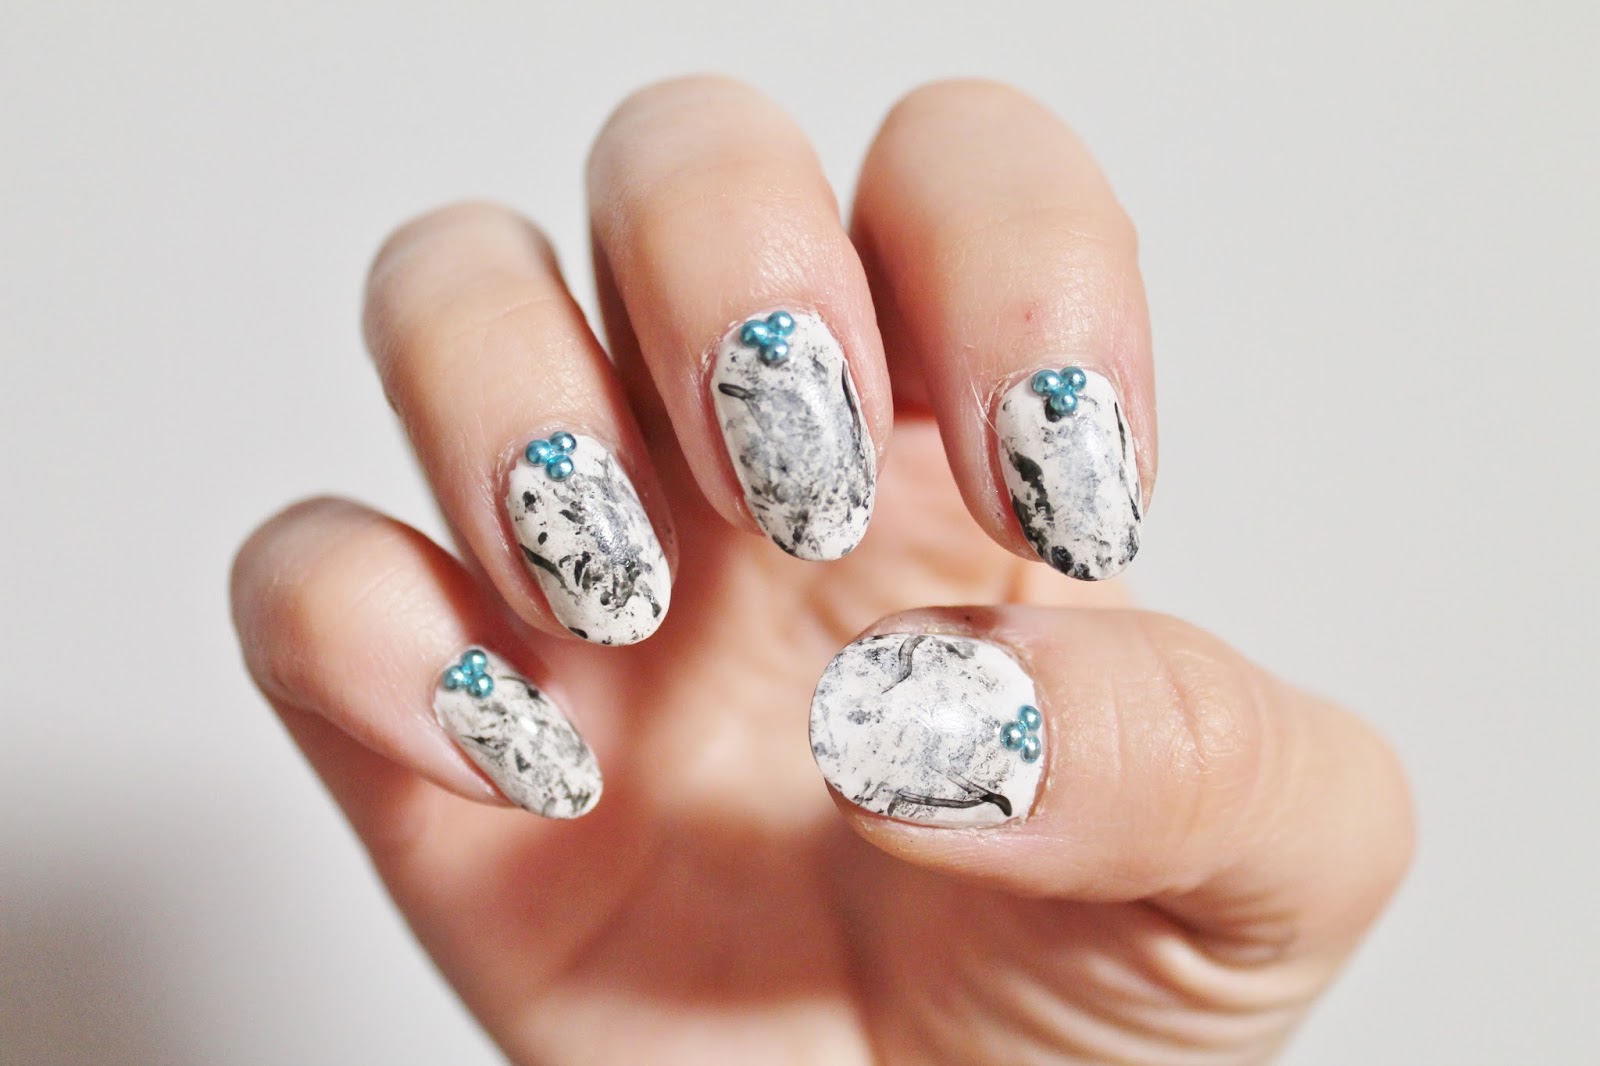 5. Step by Step Guide to Perfecting Marble Nail Art - wide 6